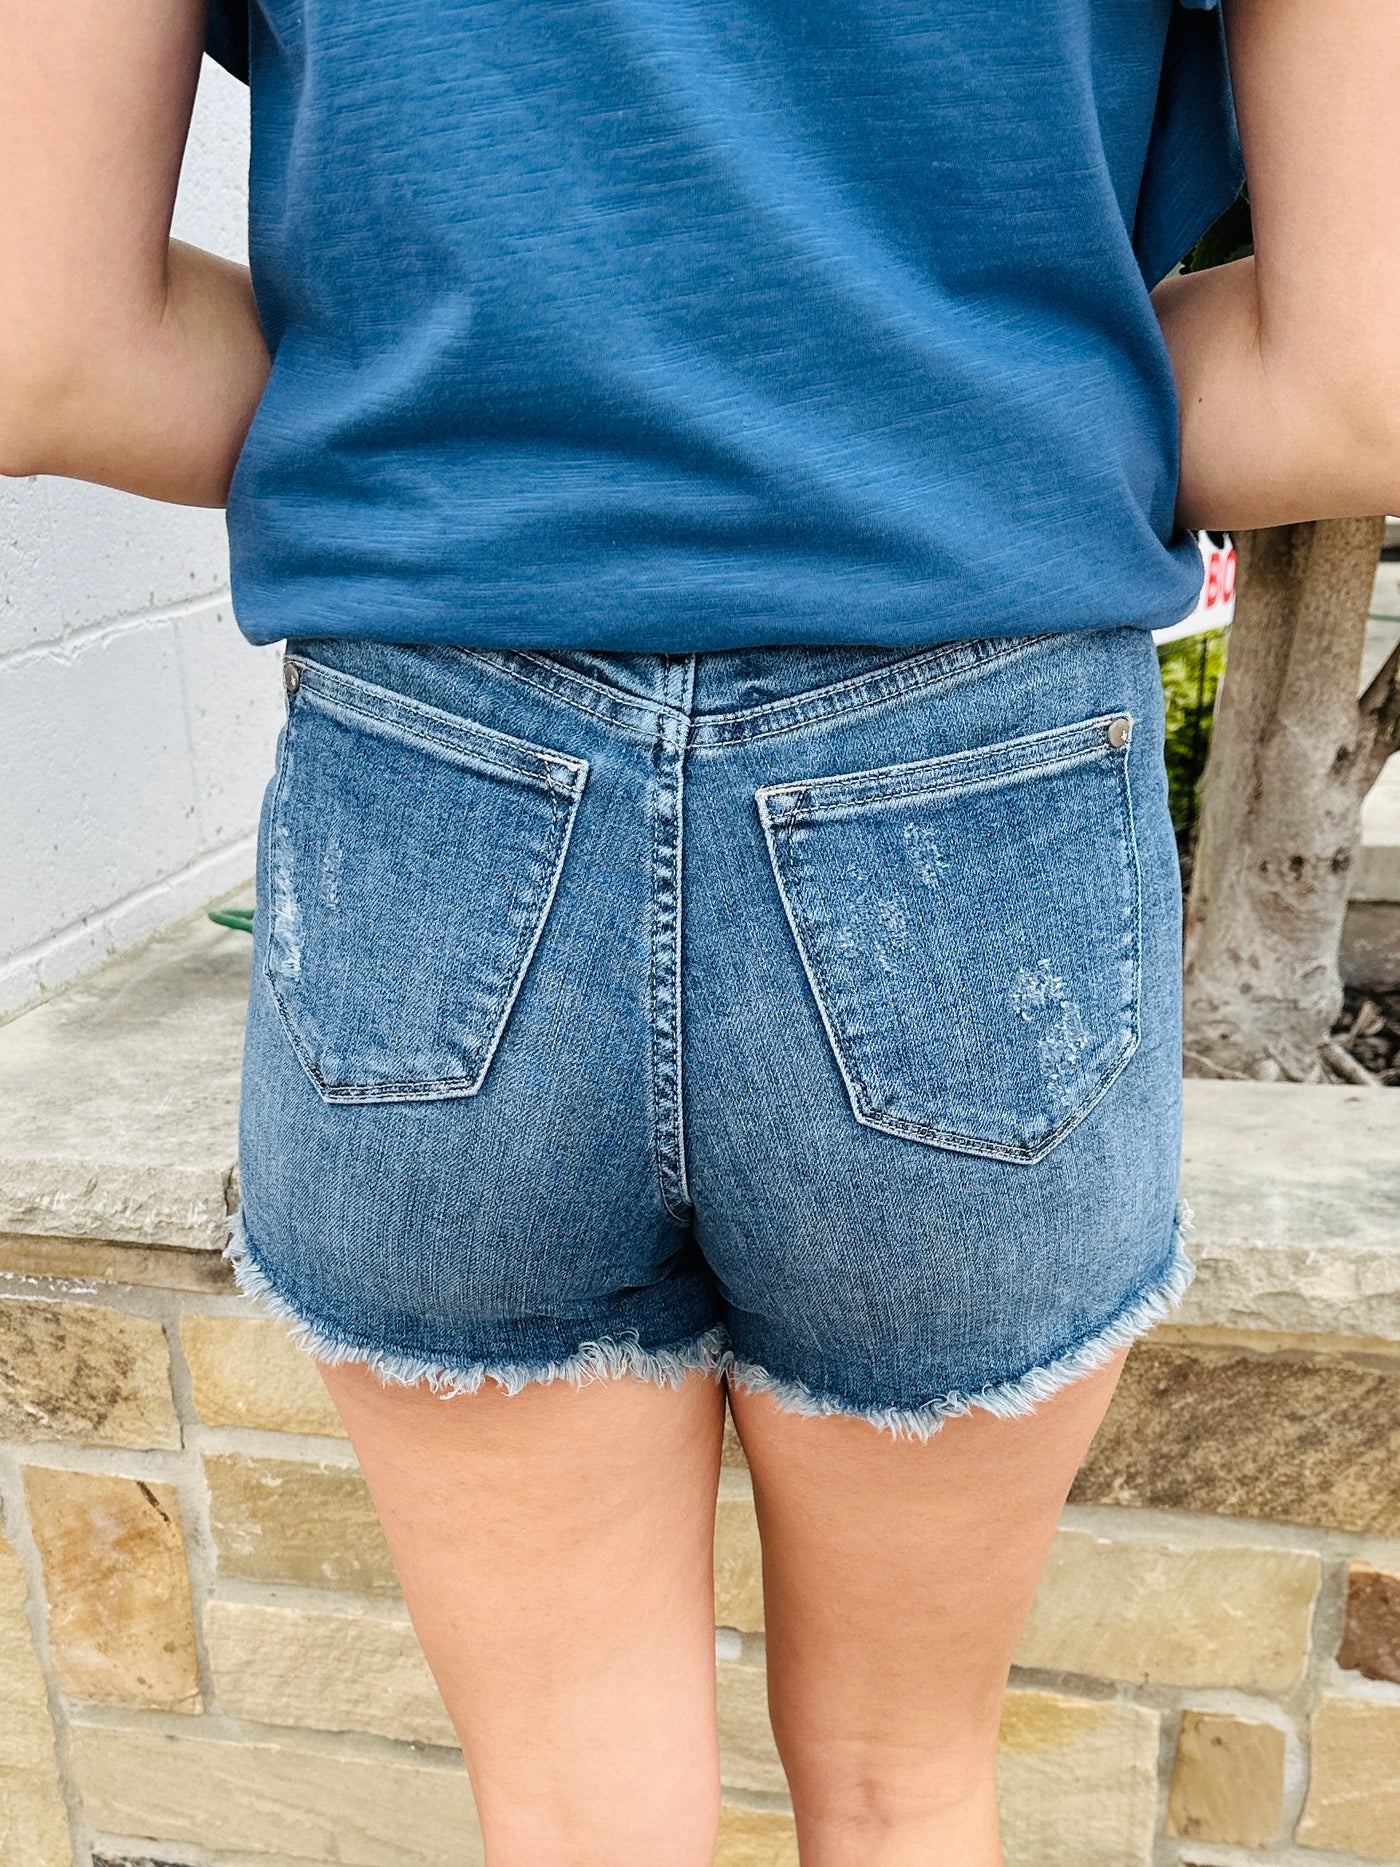 Judy Blue Never Stop Trying Tummy Control Fray Hem Shorts-Judy Blue-Shop Anchored Bliss Women's Boutique Clothing Store